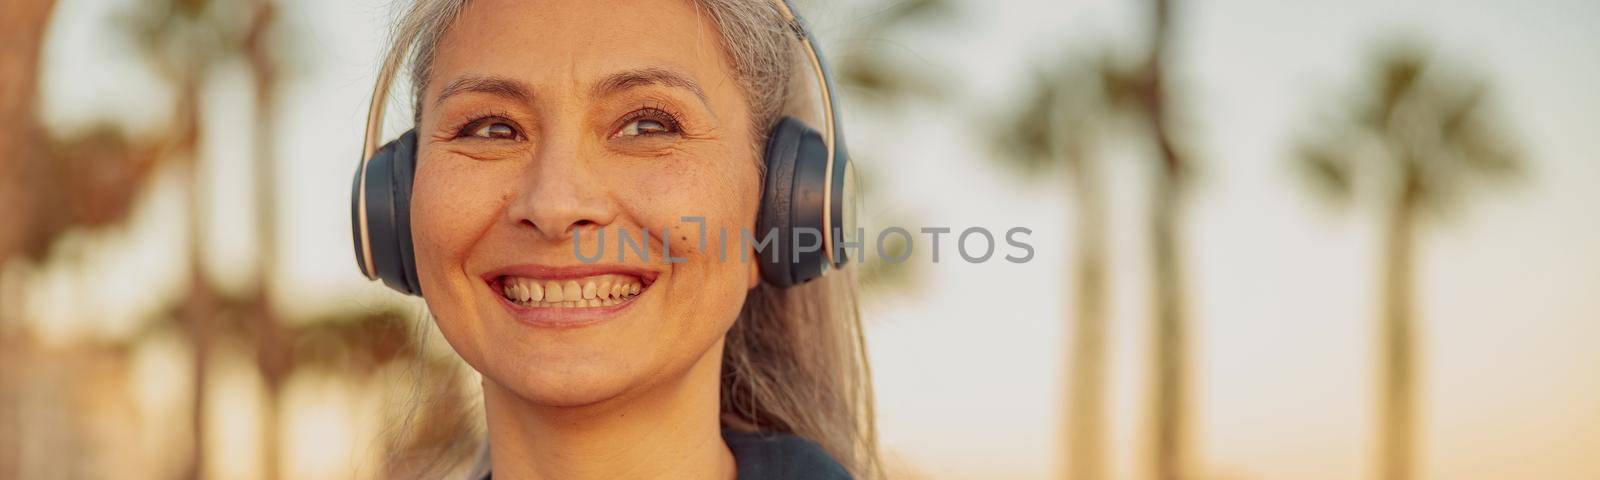 Smiling mature woman listening to music in hedphones standing on background of seafront with palm trees, looking to the side